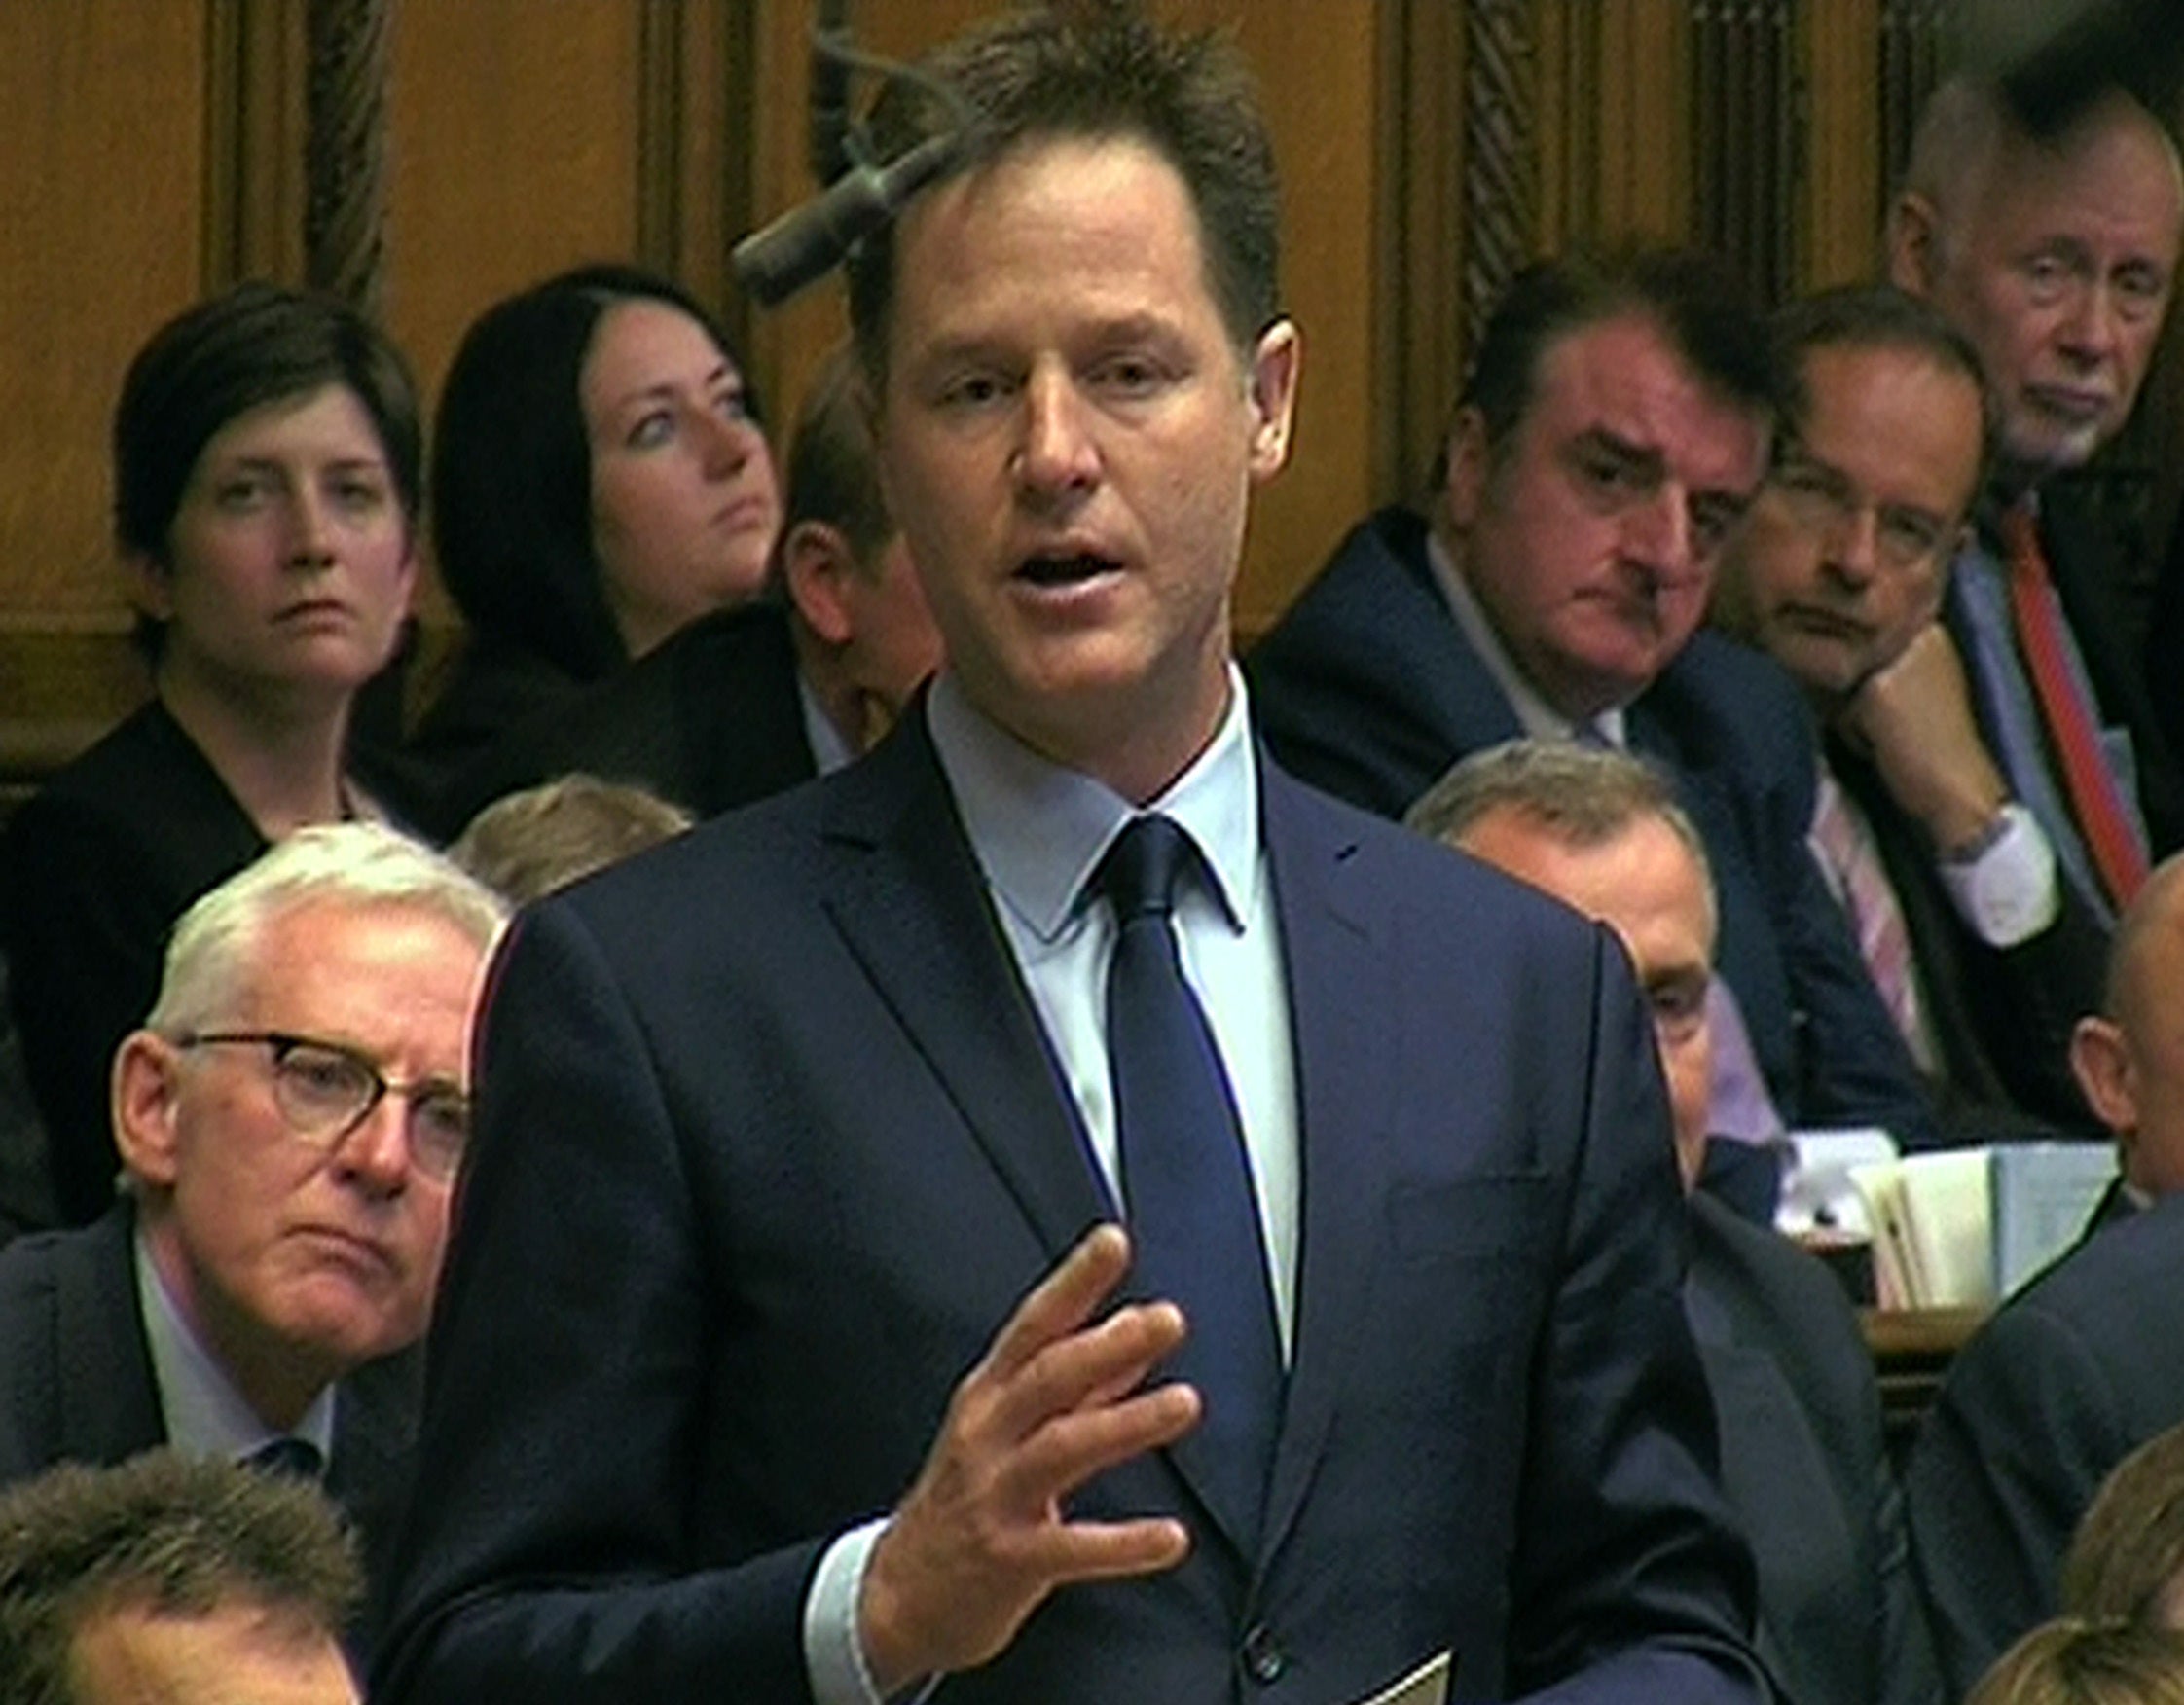 Nick Clegg pays tribute to his former colleague Charles Kennedy in a heart-felt speech in the House of Commons